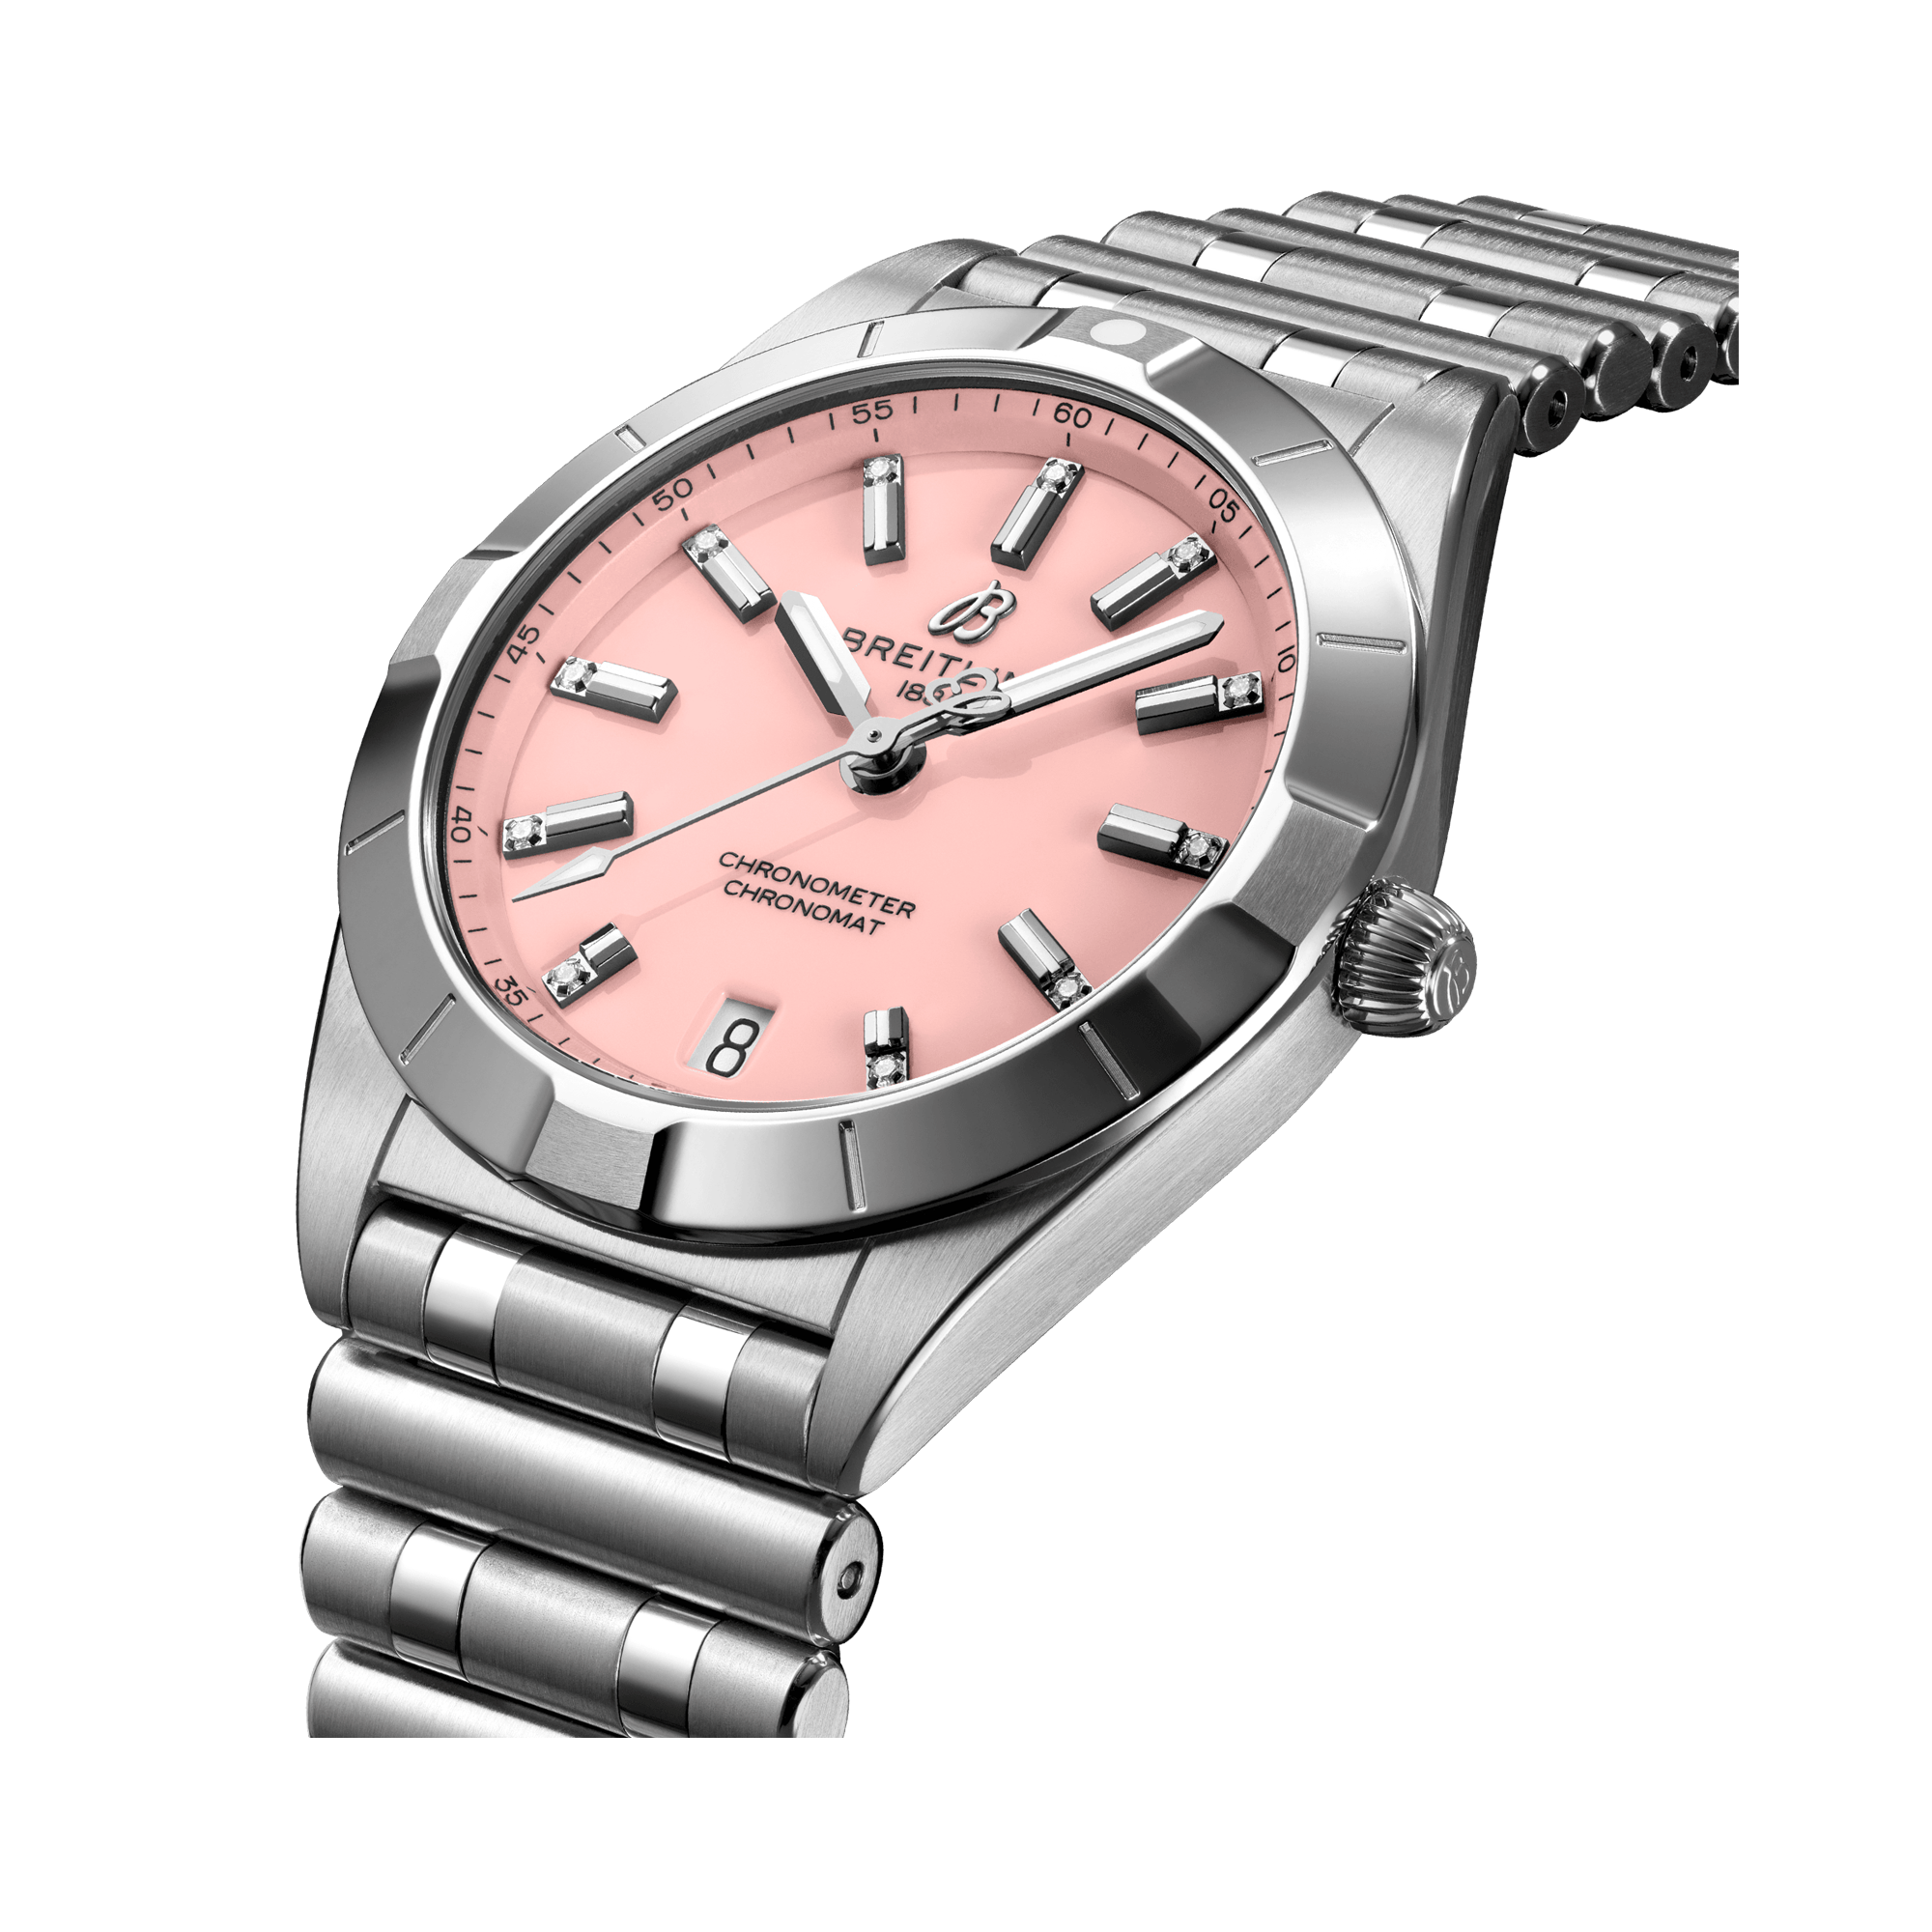 Breitling Chronomat 32 32mm, Pink Dial, Baton Numerals_3